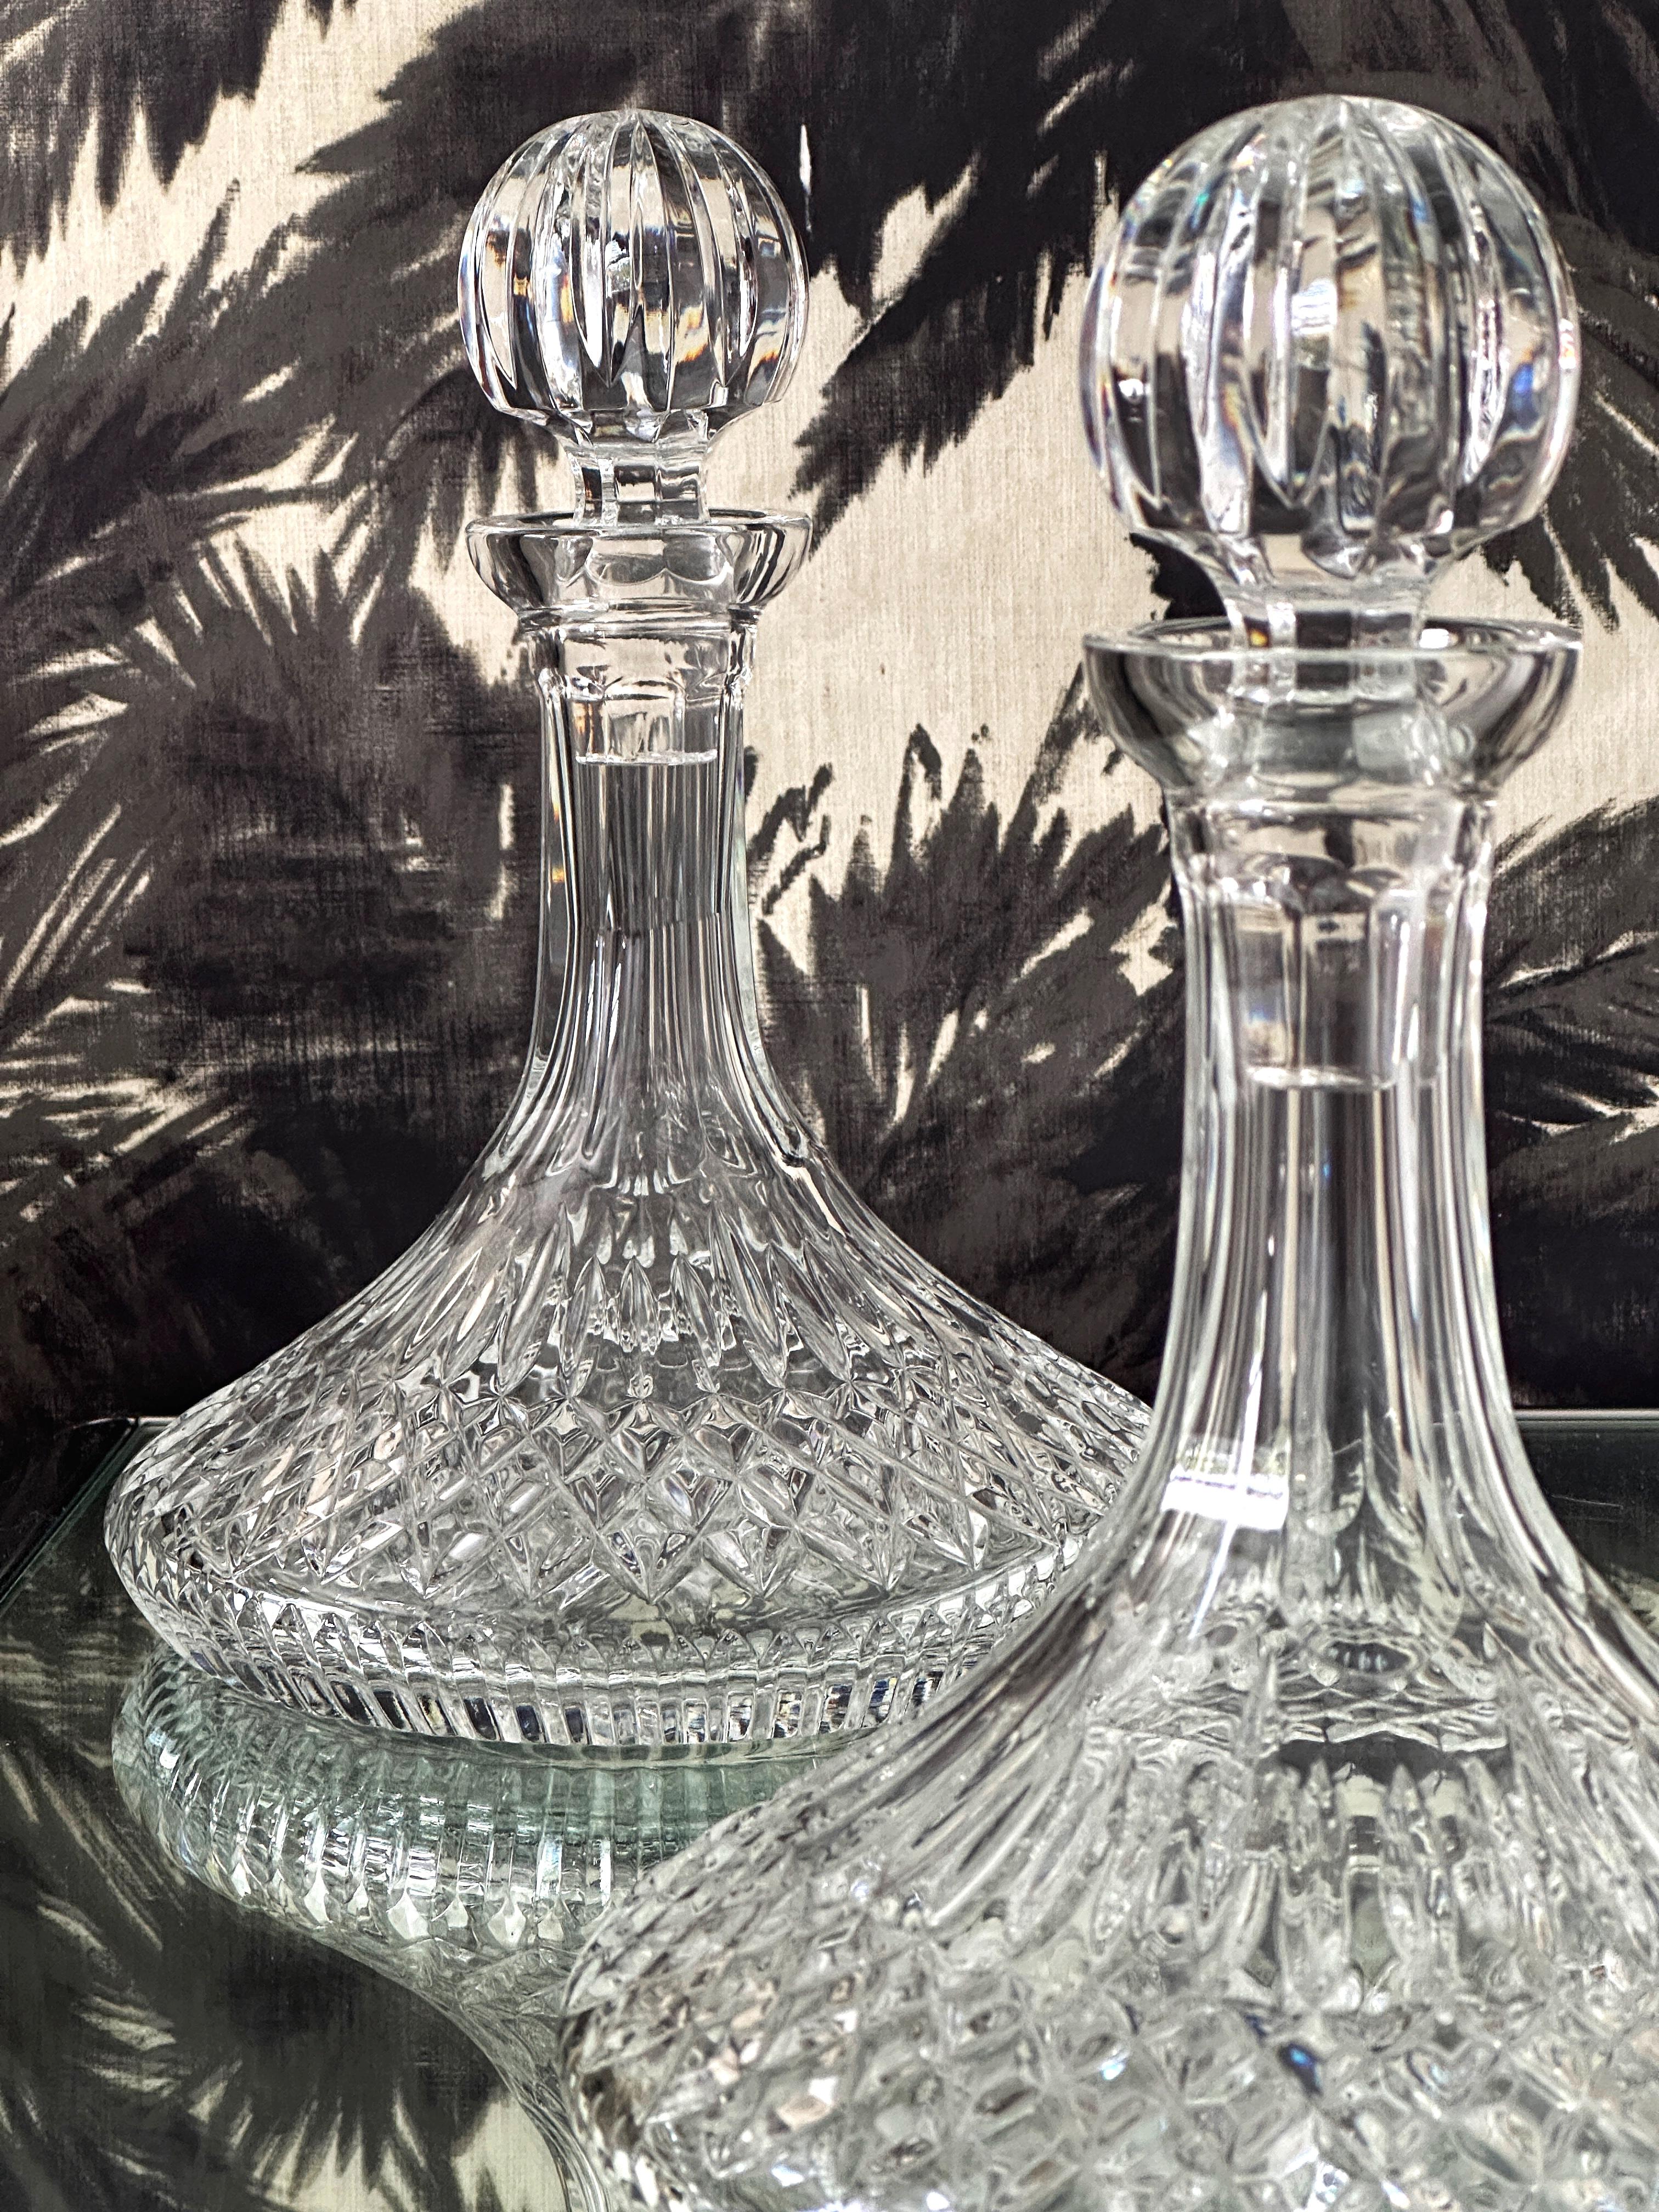 Regency Pair of Vintage Waterford Crystal Ships Decanters with Diamond Cuts, c. 1975